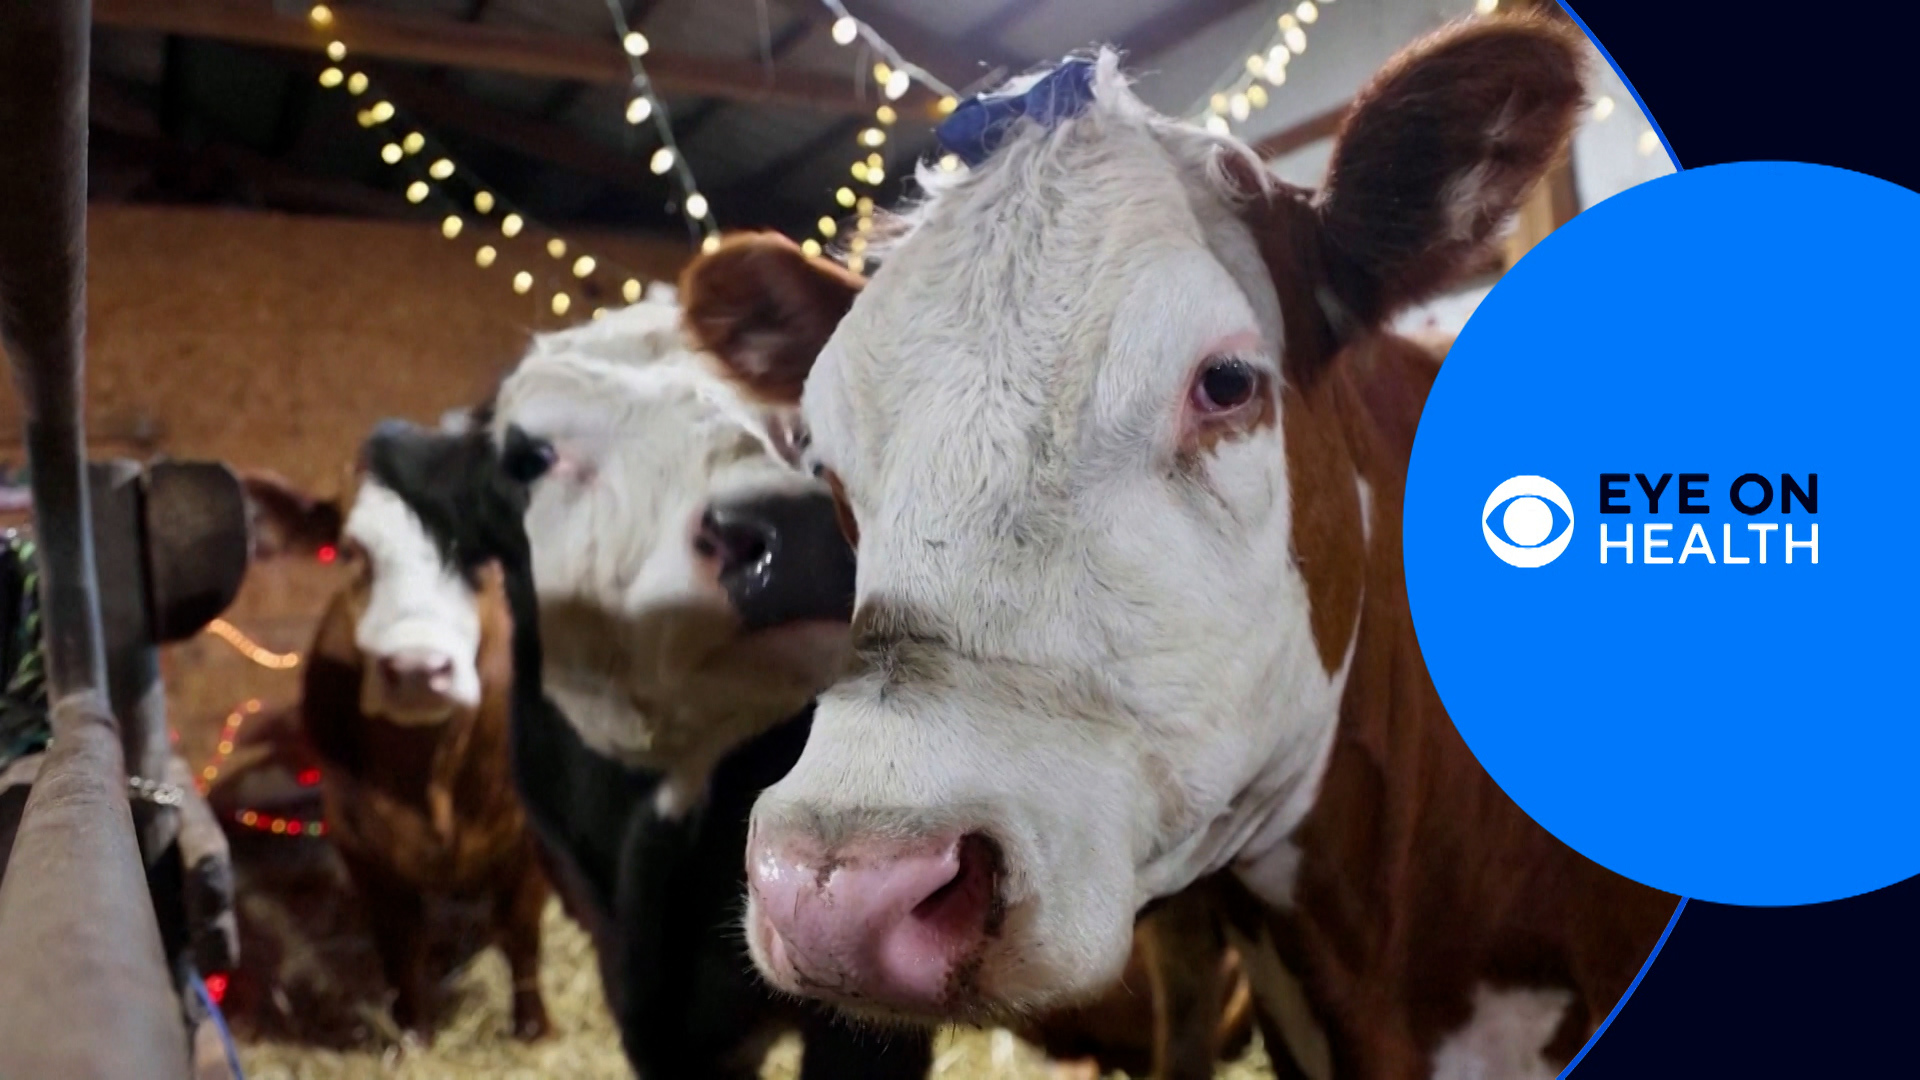 Eye on Health takes a look at the health stories that make news during the week. This week we look at cow cuddling, the "Silver tsunami" and more.